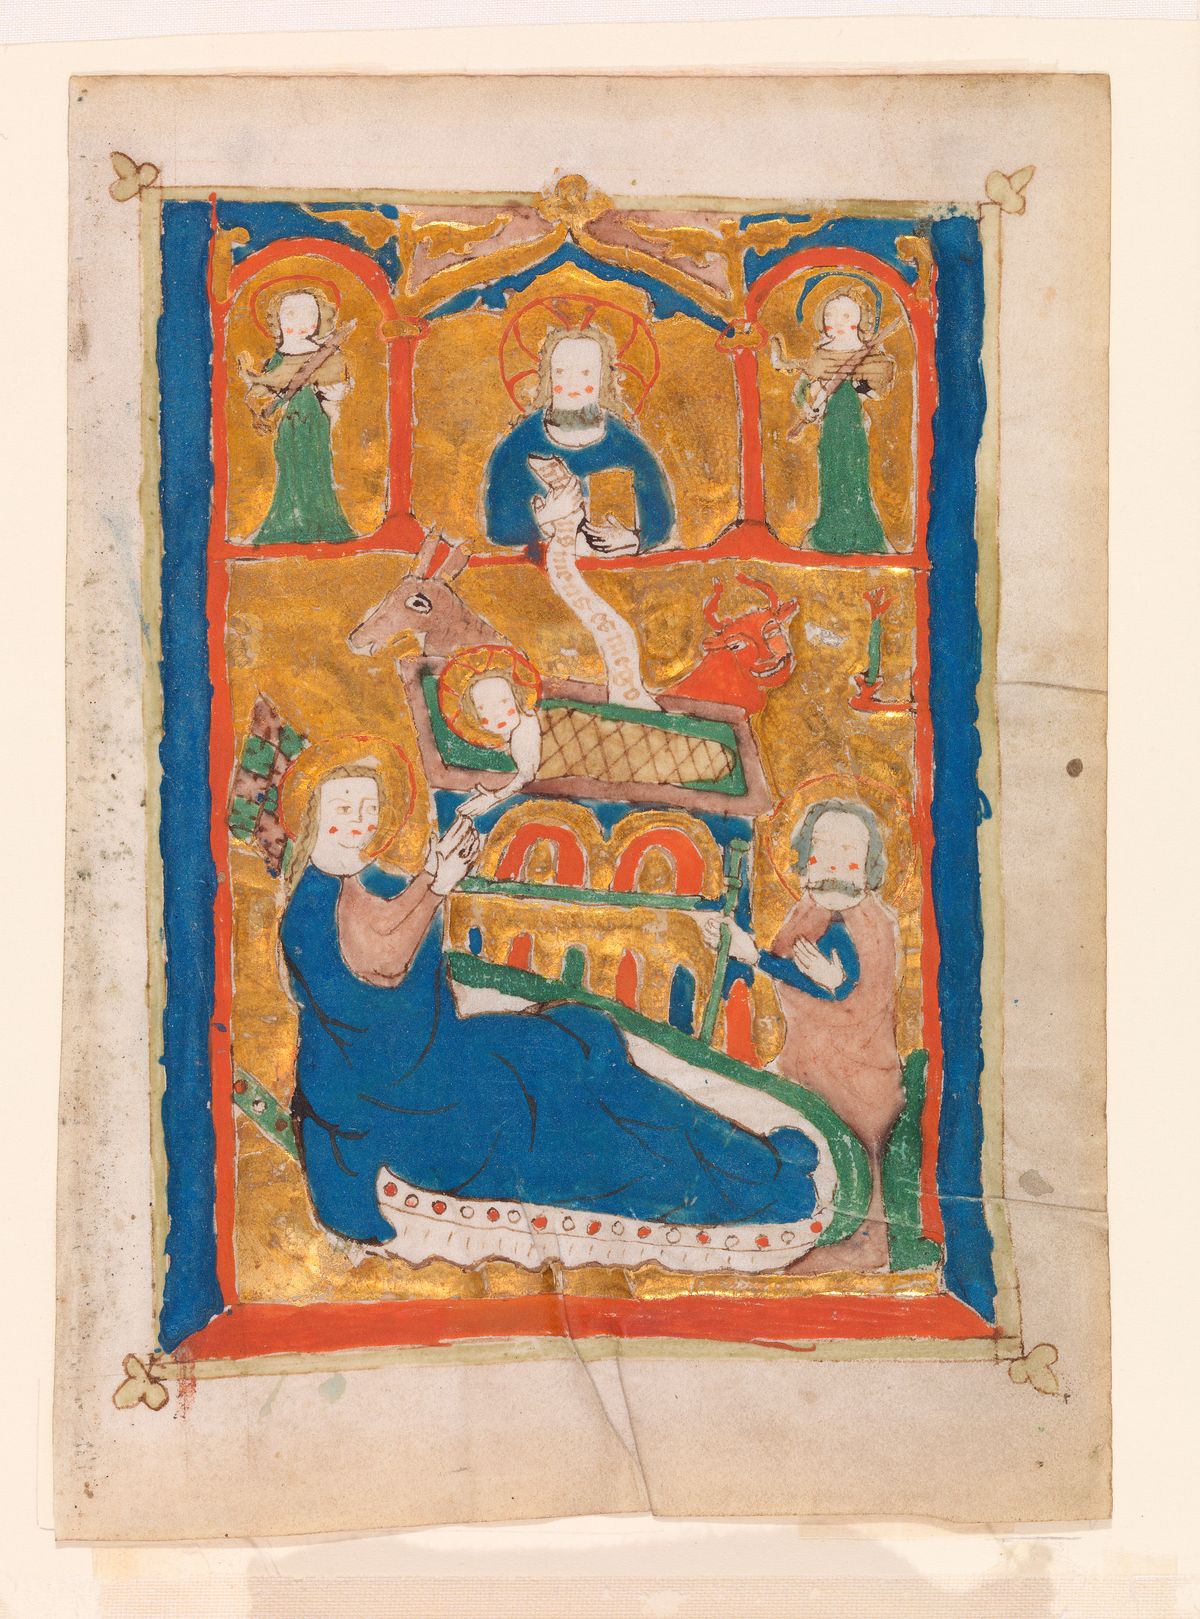 The Nativity with God the Father, Joseph, and Angels (late 14th century) - Public Domain Illuminated Manuscript